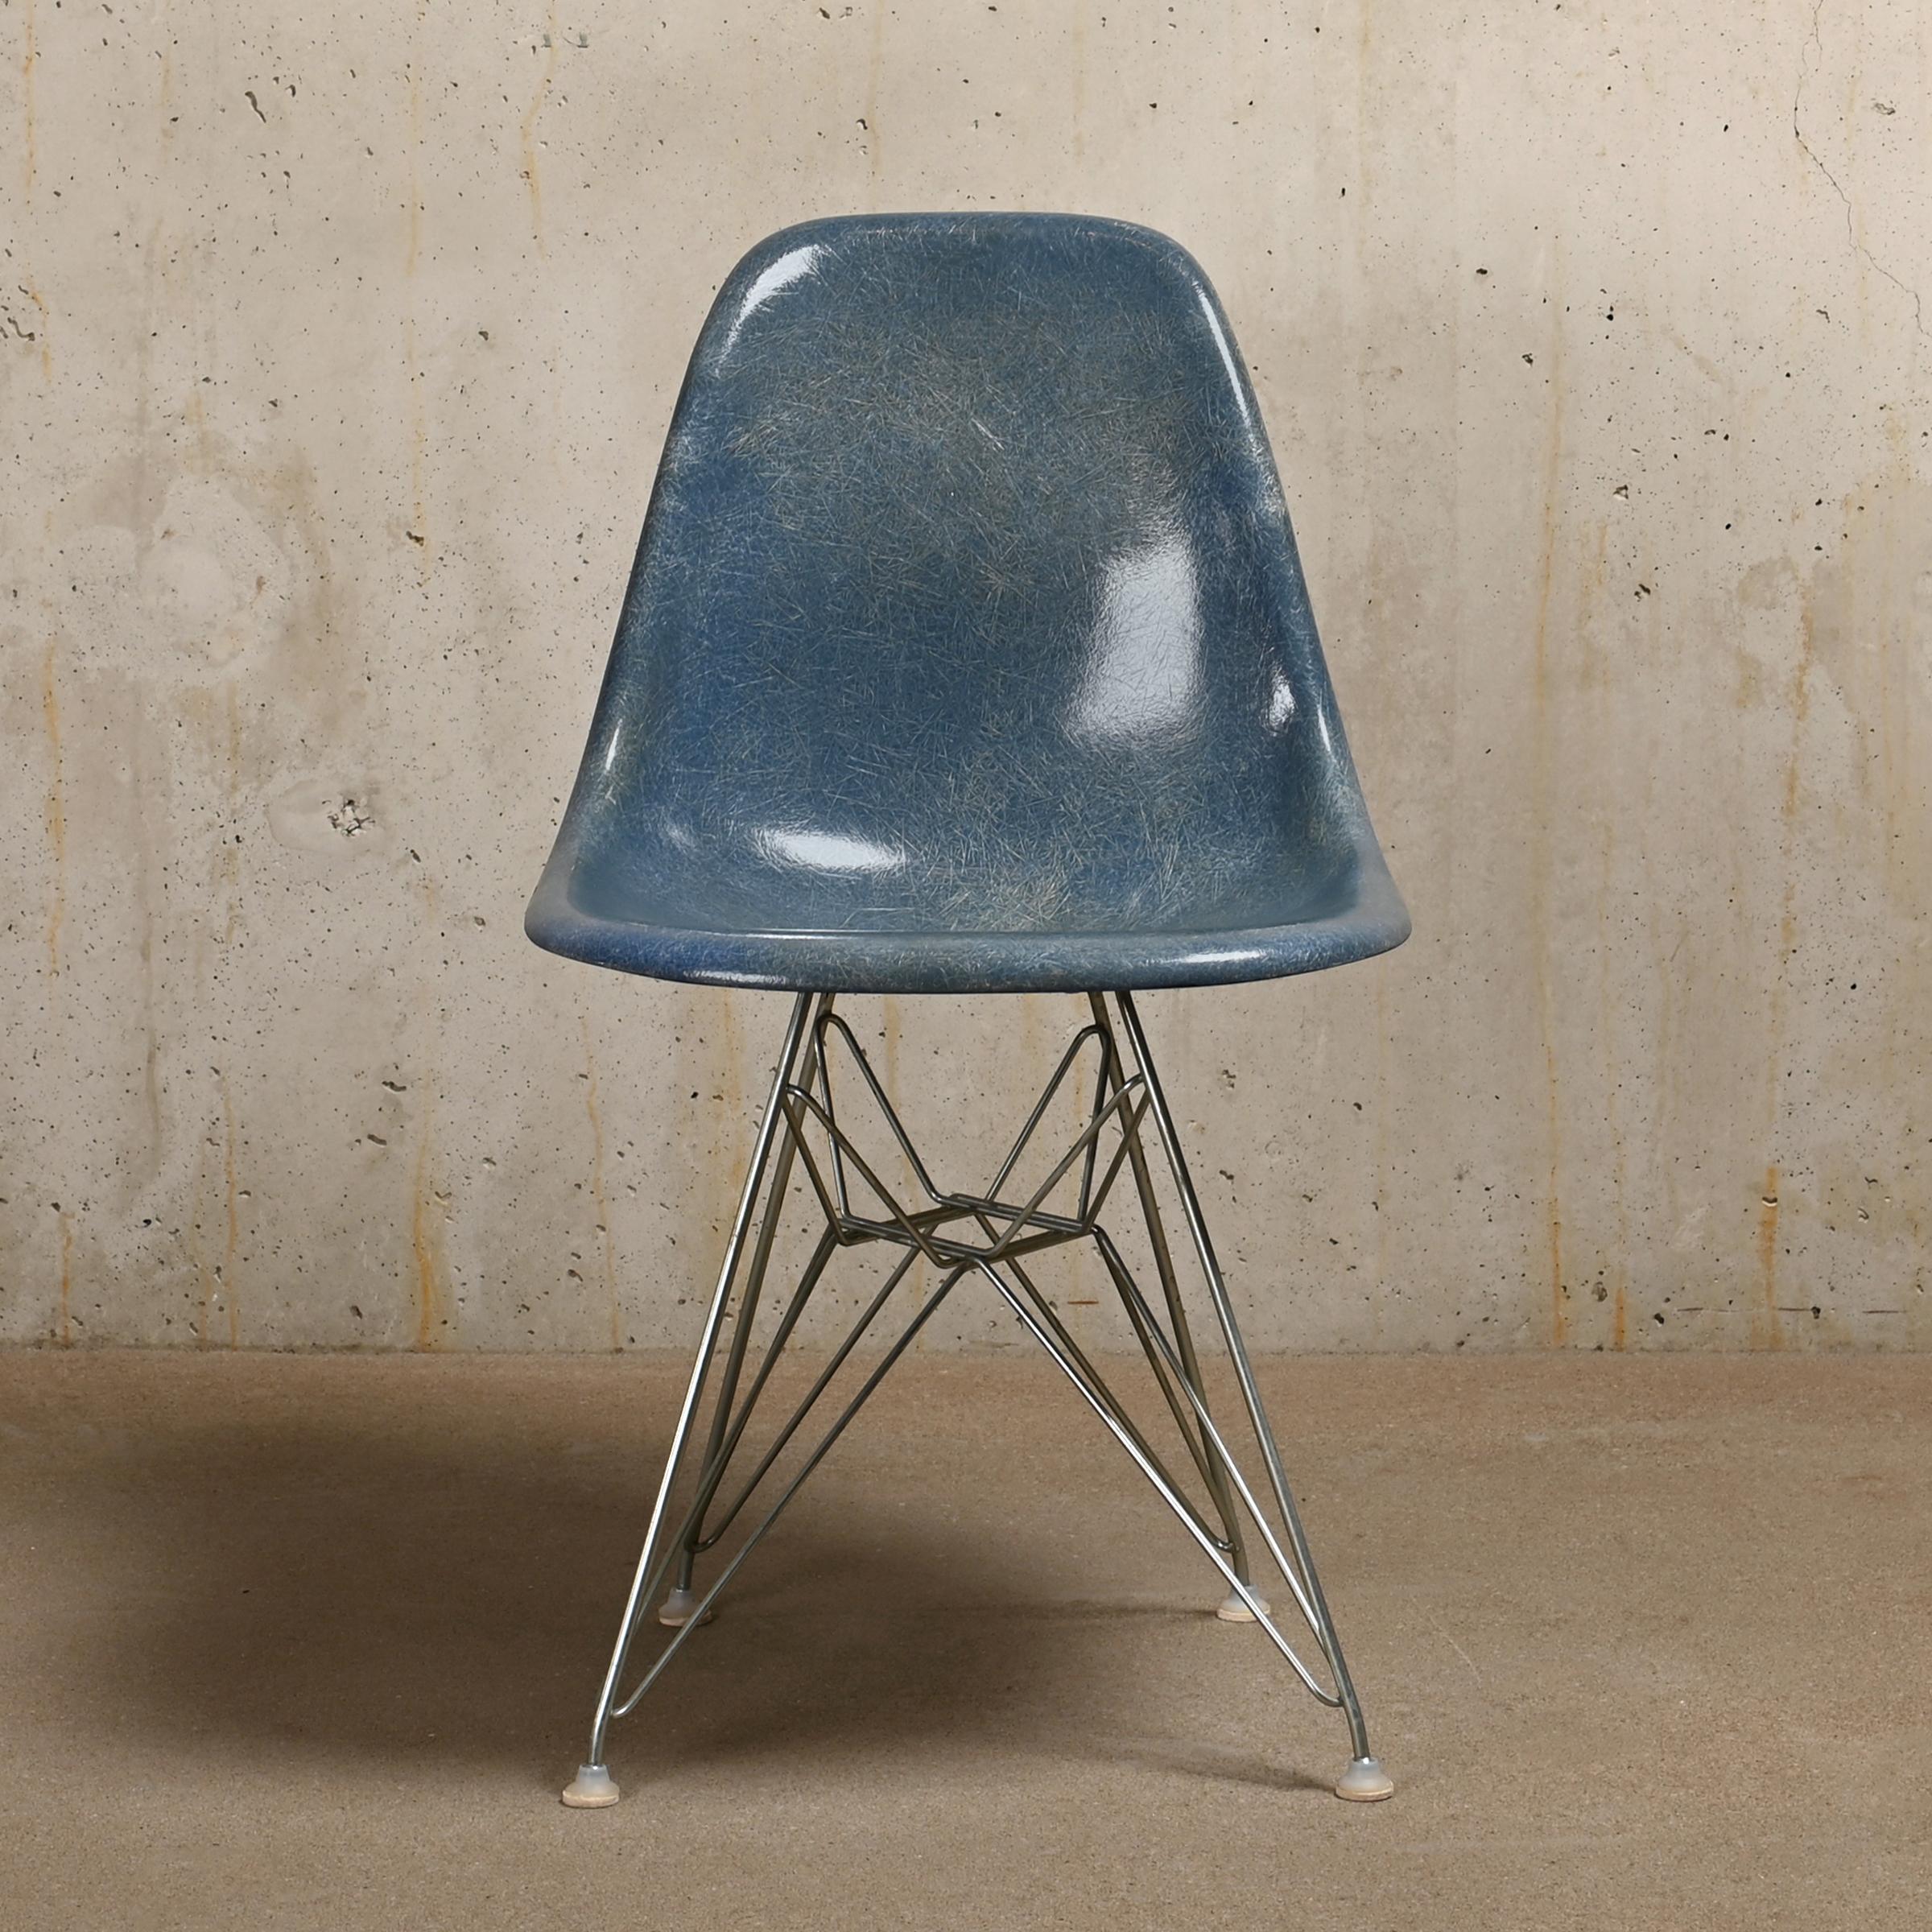 Iconic DSR (Dining Side chair Rod base) chair designed by Charles and Ray Eames for Herman Miller / Vitra. Molded fiberglass shell in the rare contract colour Medium Blue. Assembled on an original zinc plated Eiffel base. The chair is in very good